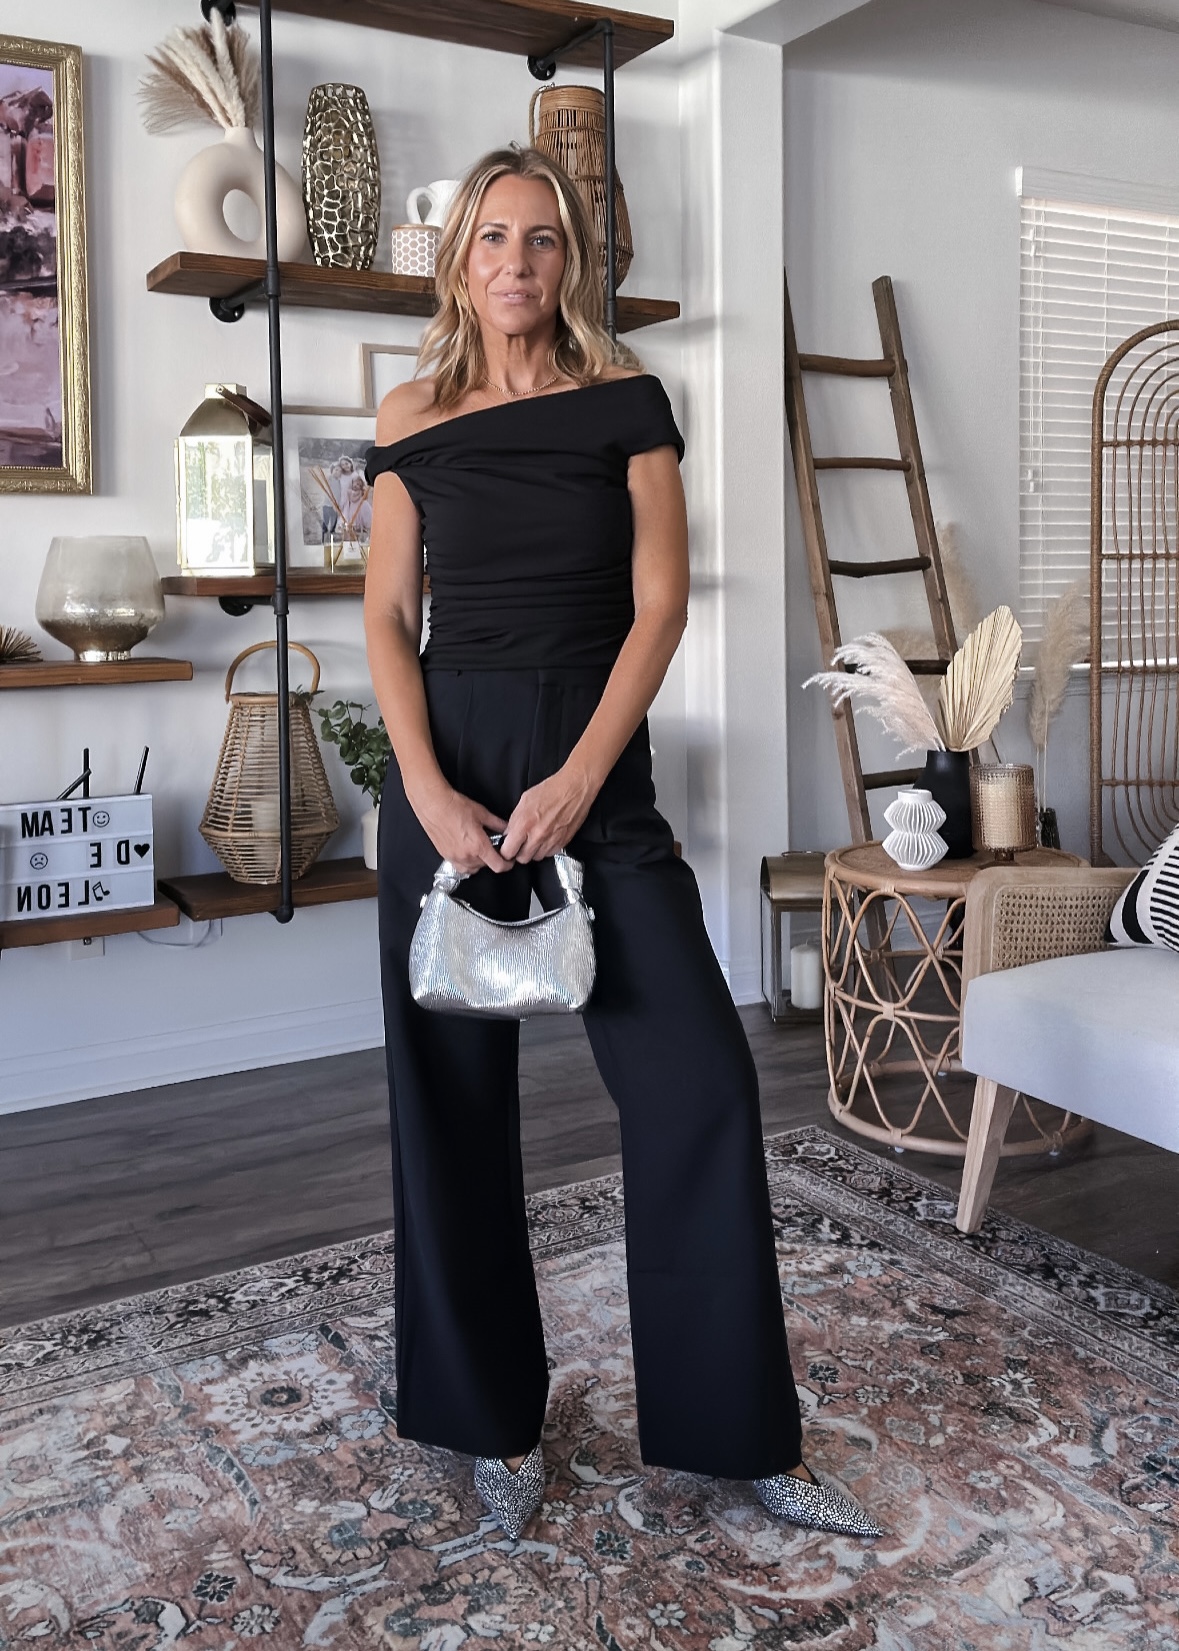 WAYS TO WEAR- BLACK TROUSERS-Jaclyn De Leon Style. Black trousers are a closet staple for the Fall and Winter seasons. They can easily be dressed up or down in numerous ways!